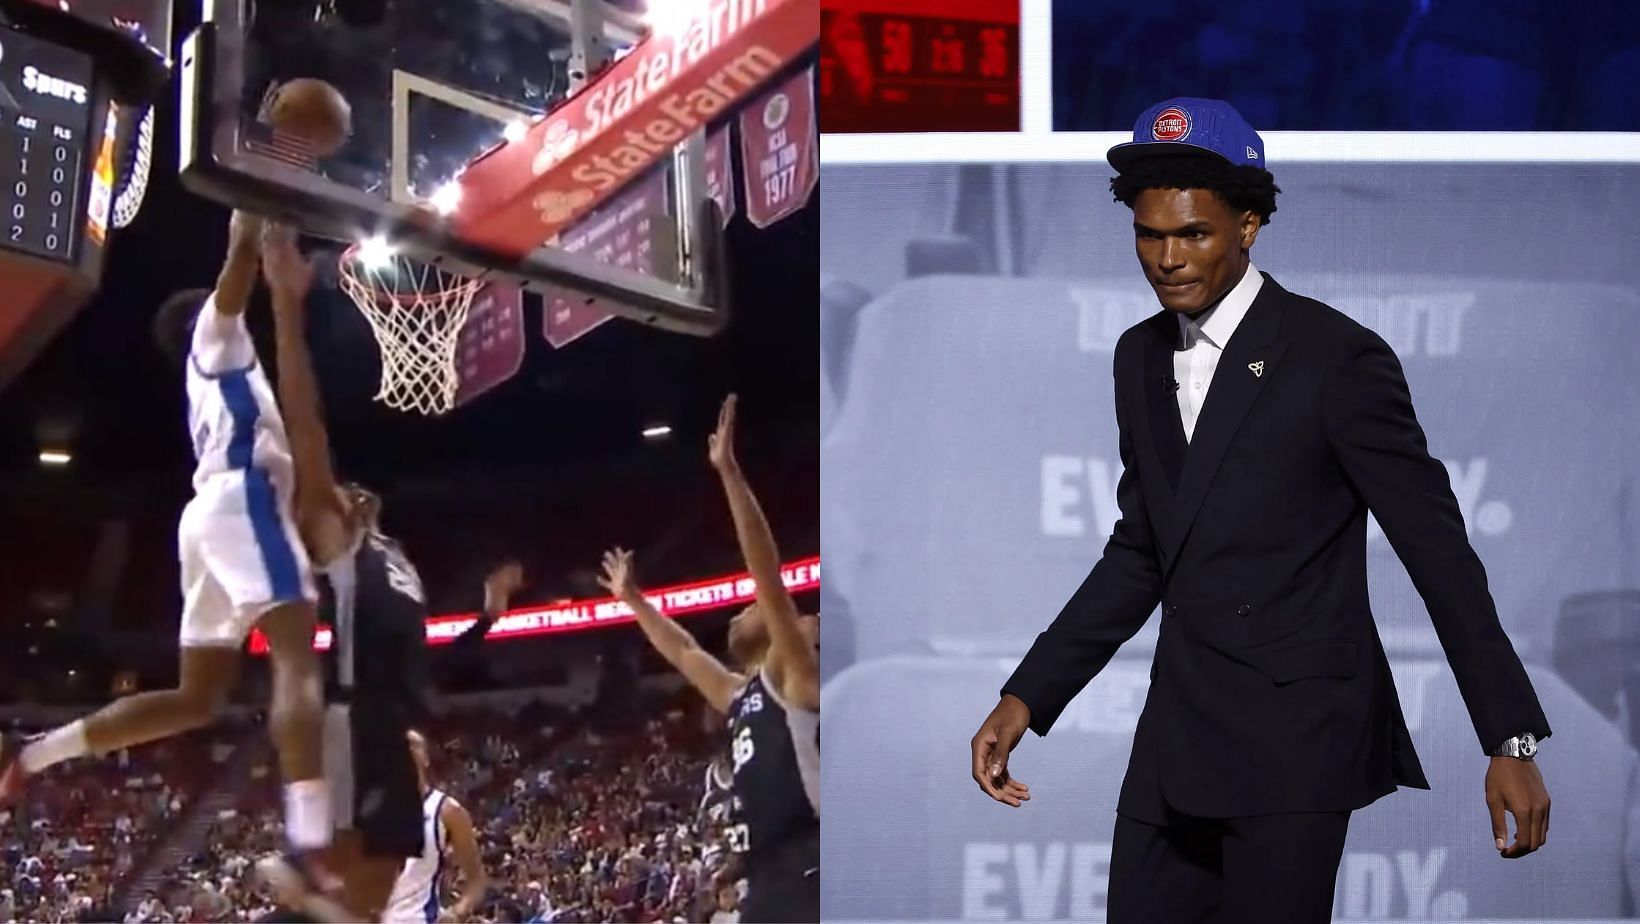 Detroit Pistons rookie Ausar Thompson showed off his hops against the San Antonio Spurs in a summer league game.